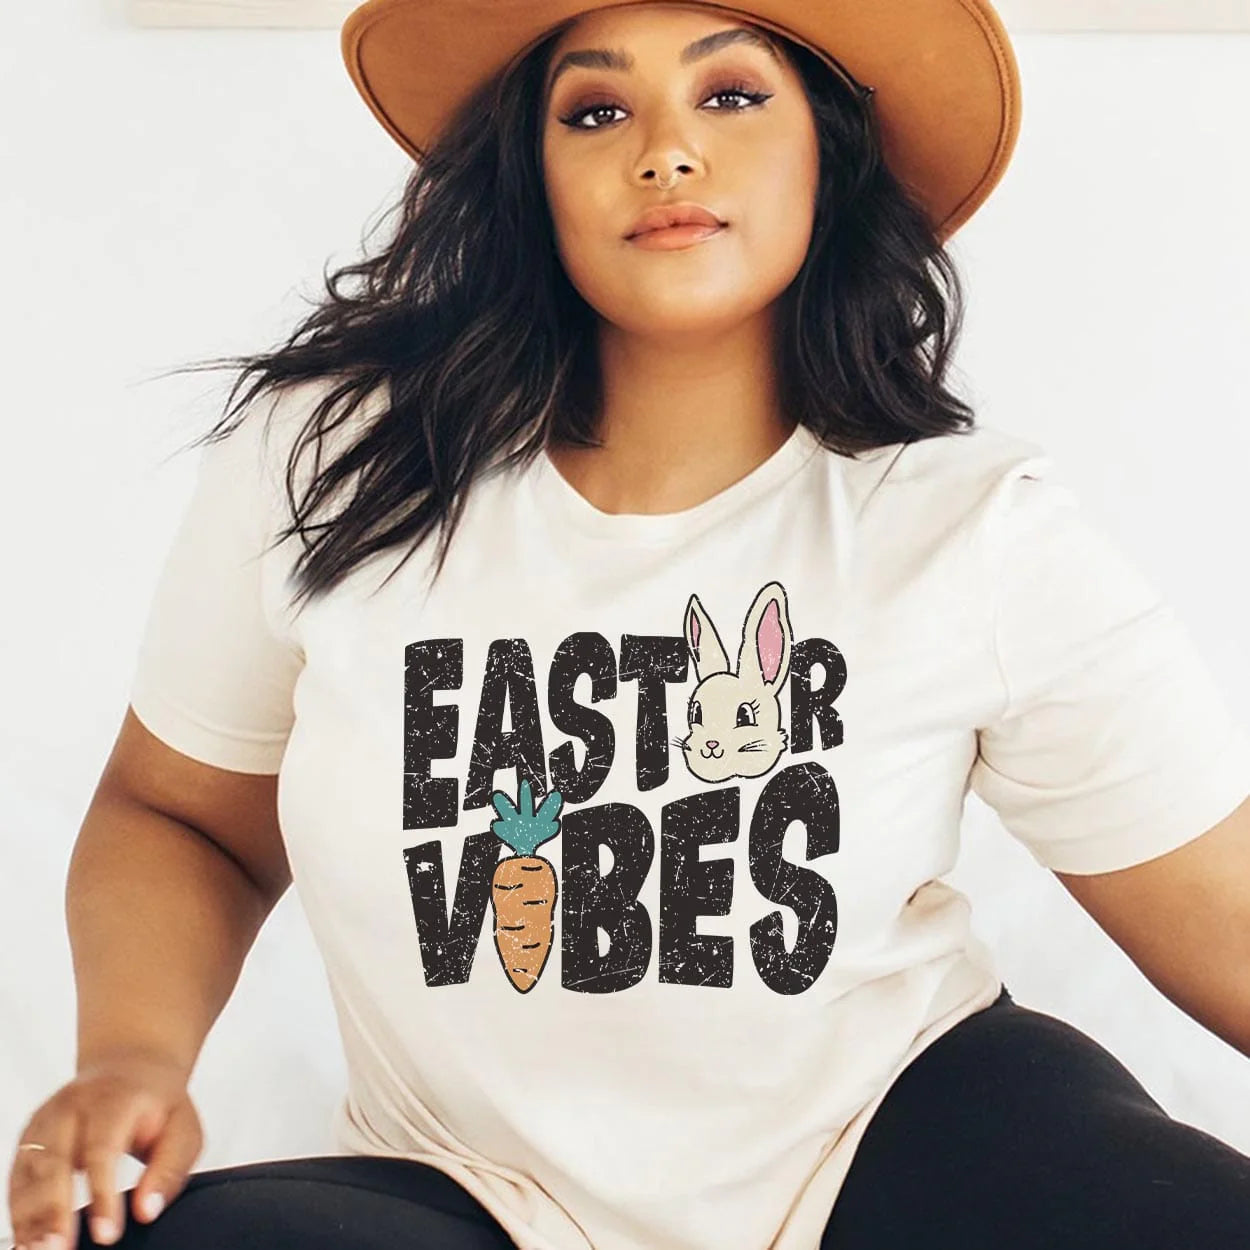 A cream colored short sleeve tee with the words "Easter Vibes" in the center with a bunny for the second E in Easter and a carrot for the I in vibes, Item is pictured on a white background.